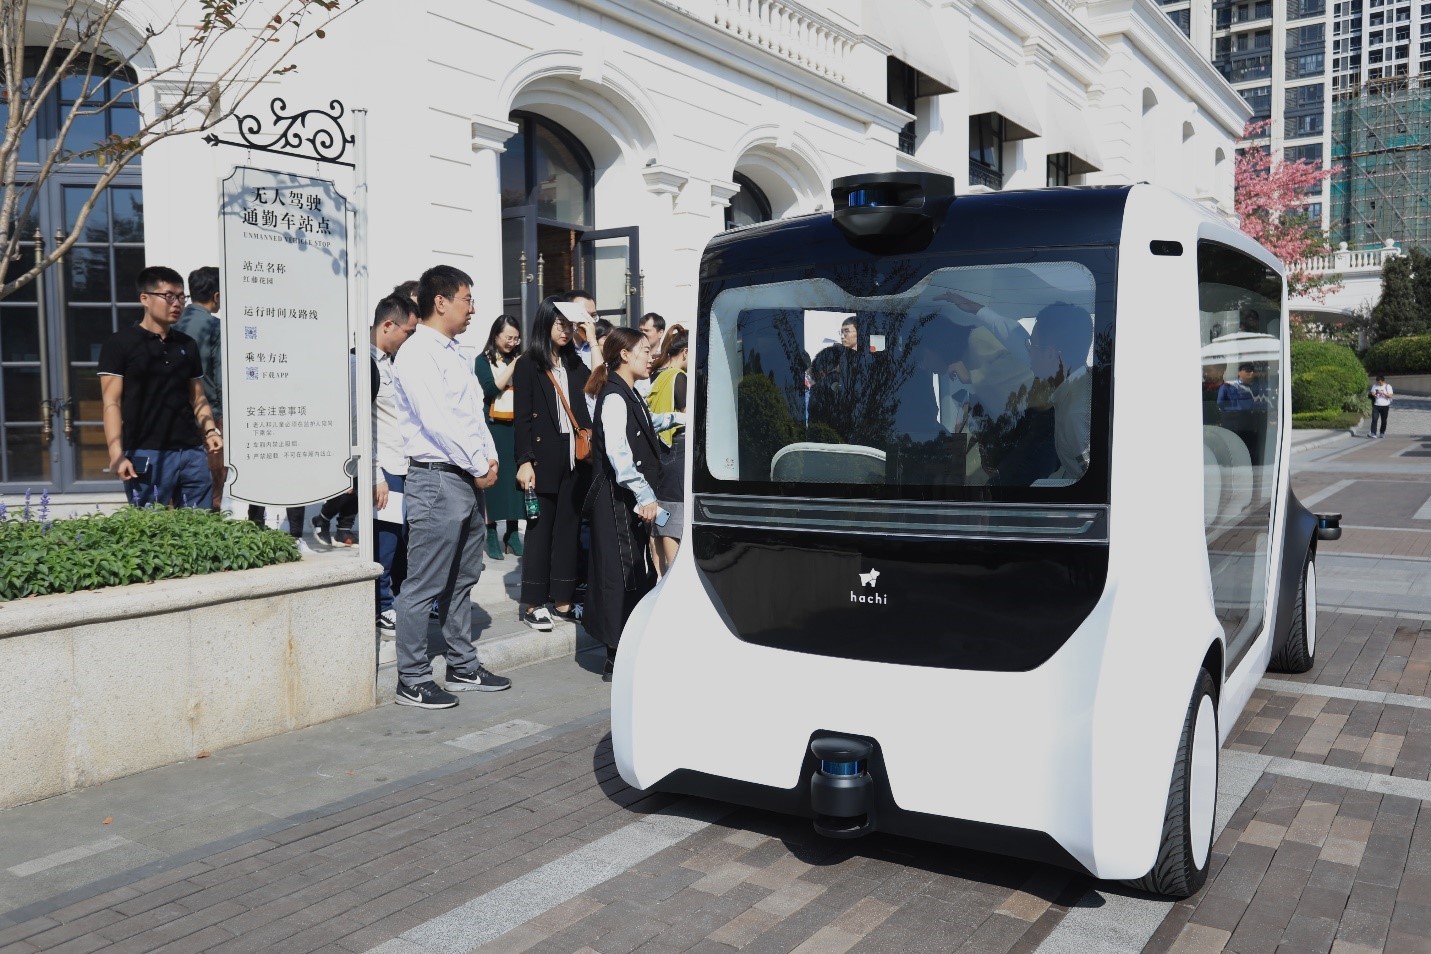 SEEDLAND's Autonomous Hachi Auto Starts Operation, a First in Chinese Real  Estate